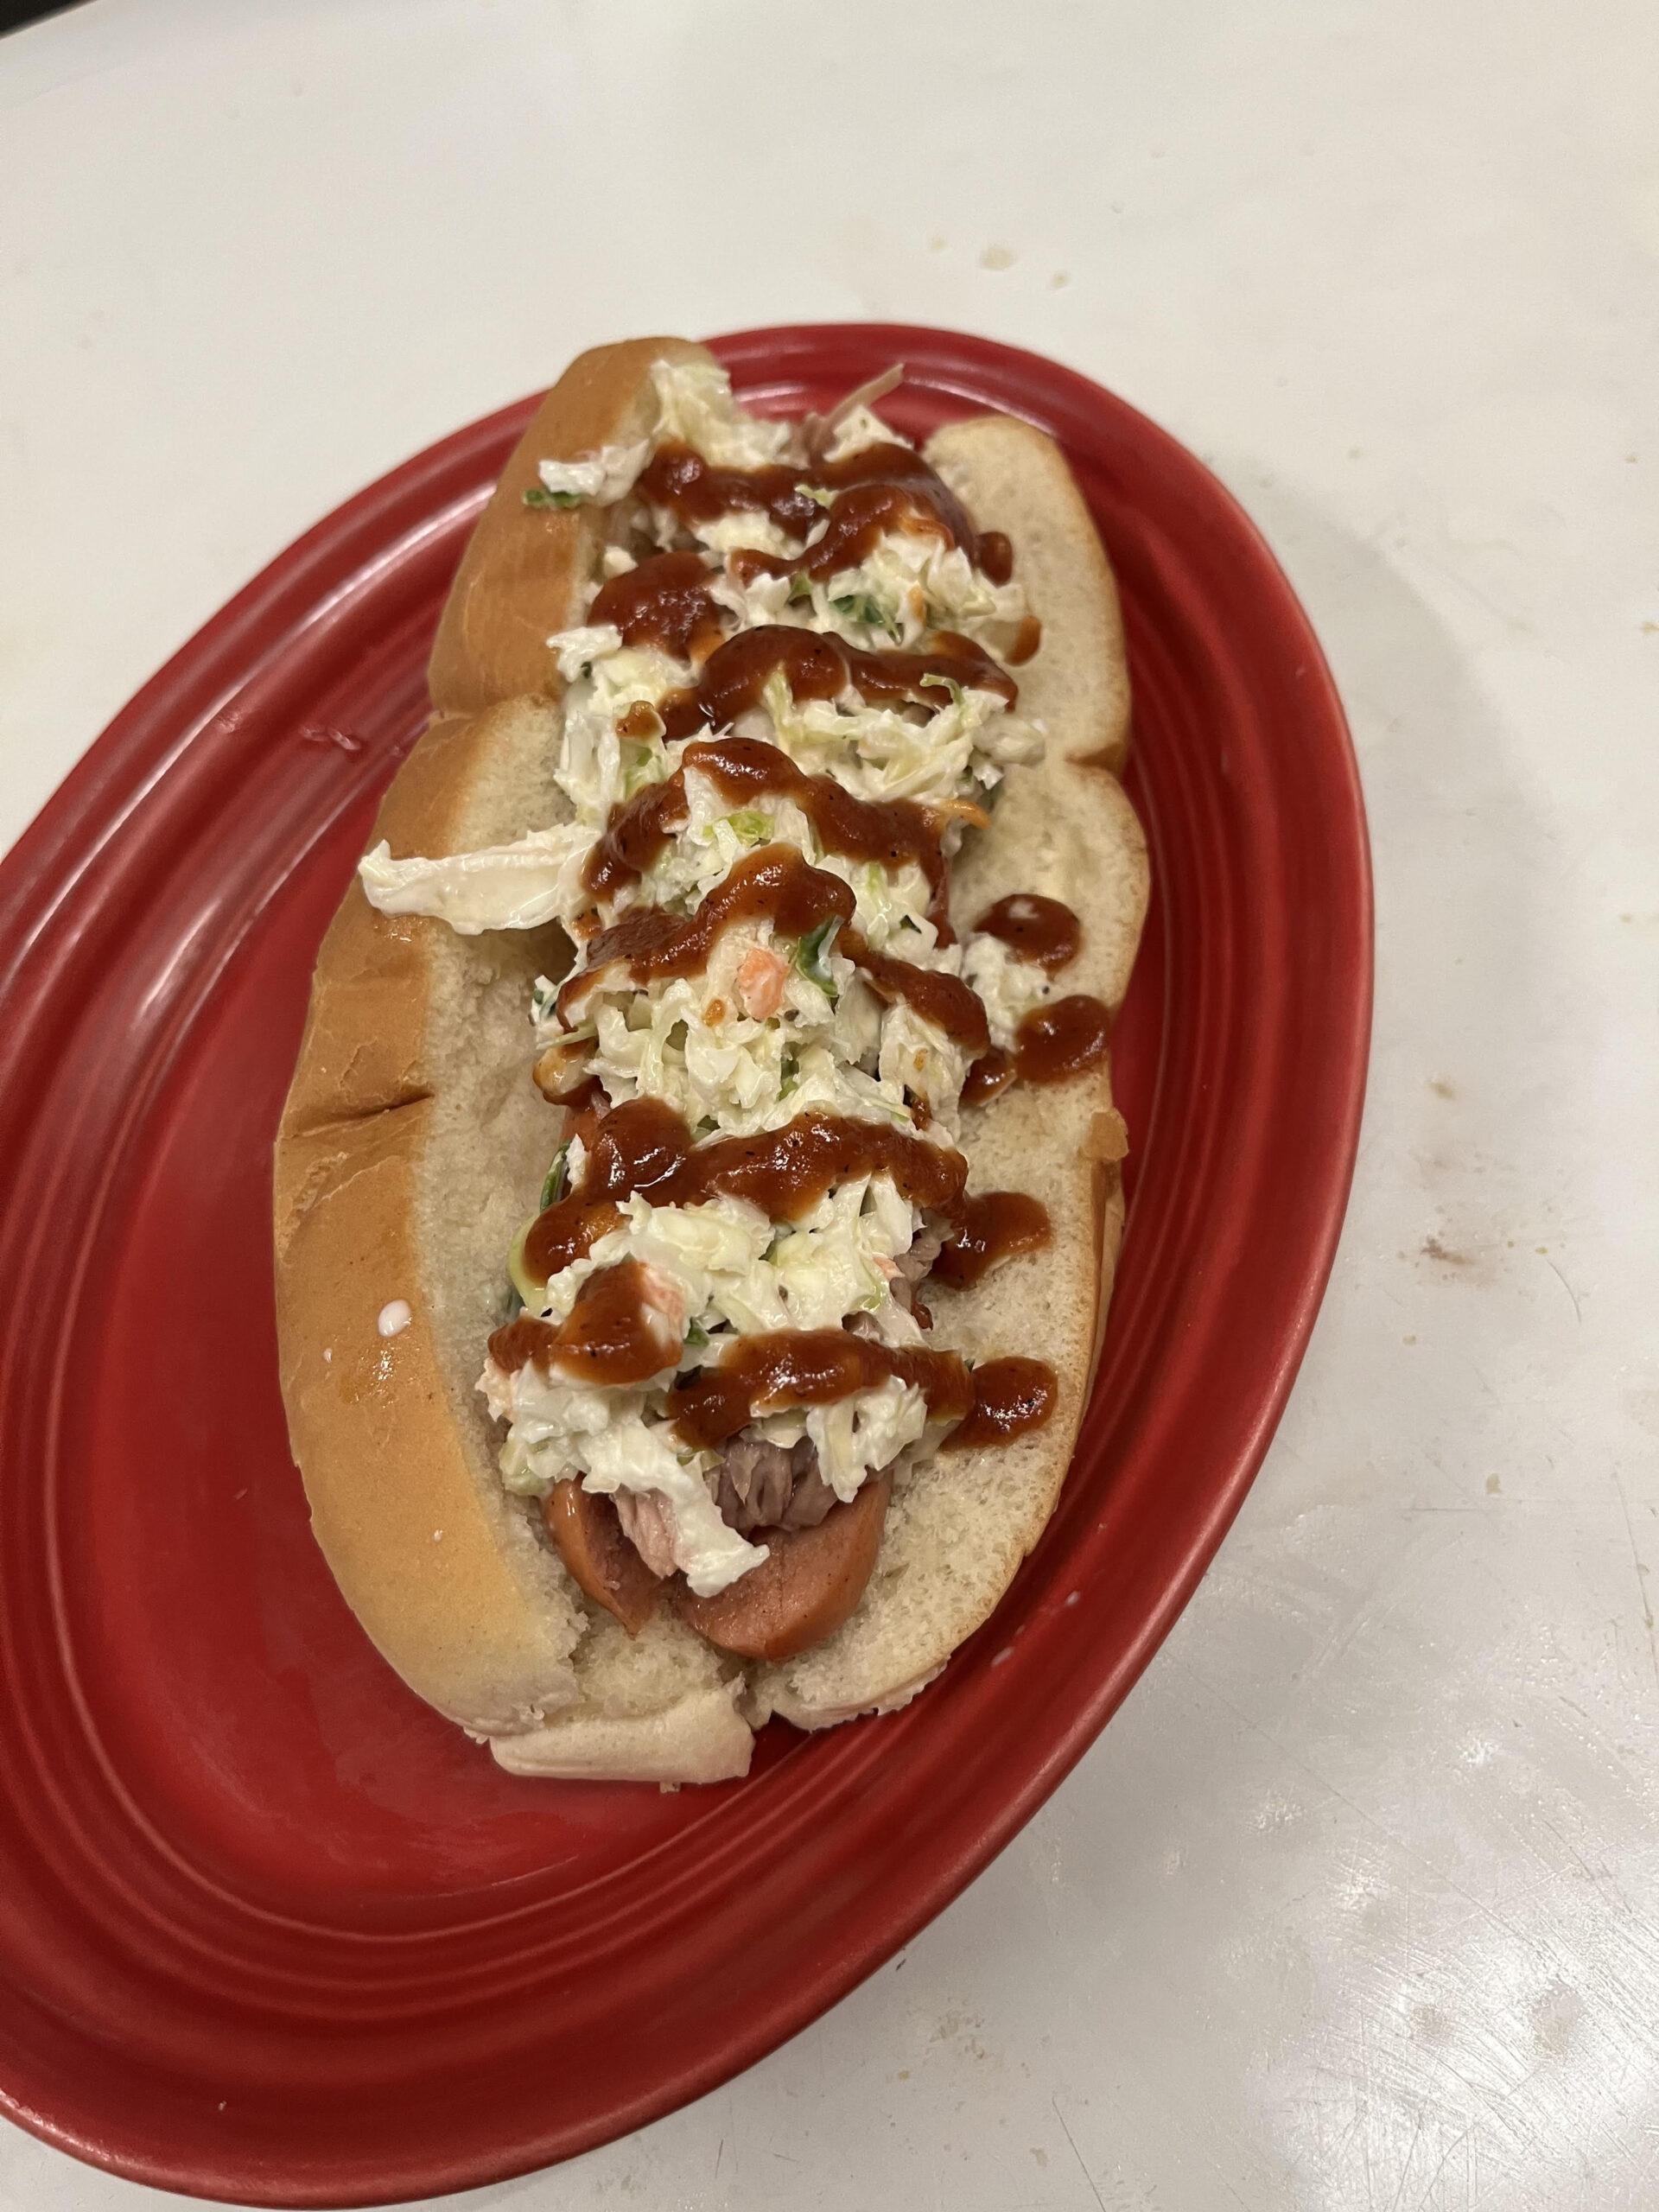 Best Hot Dogs Near Me - December 2023: Find Nearby Hot Dogs